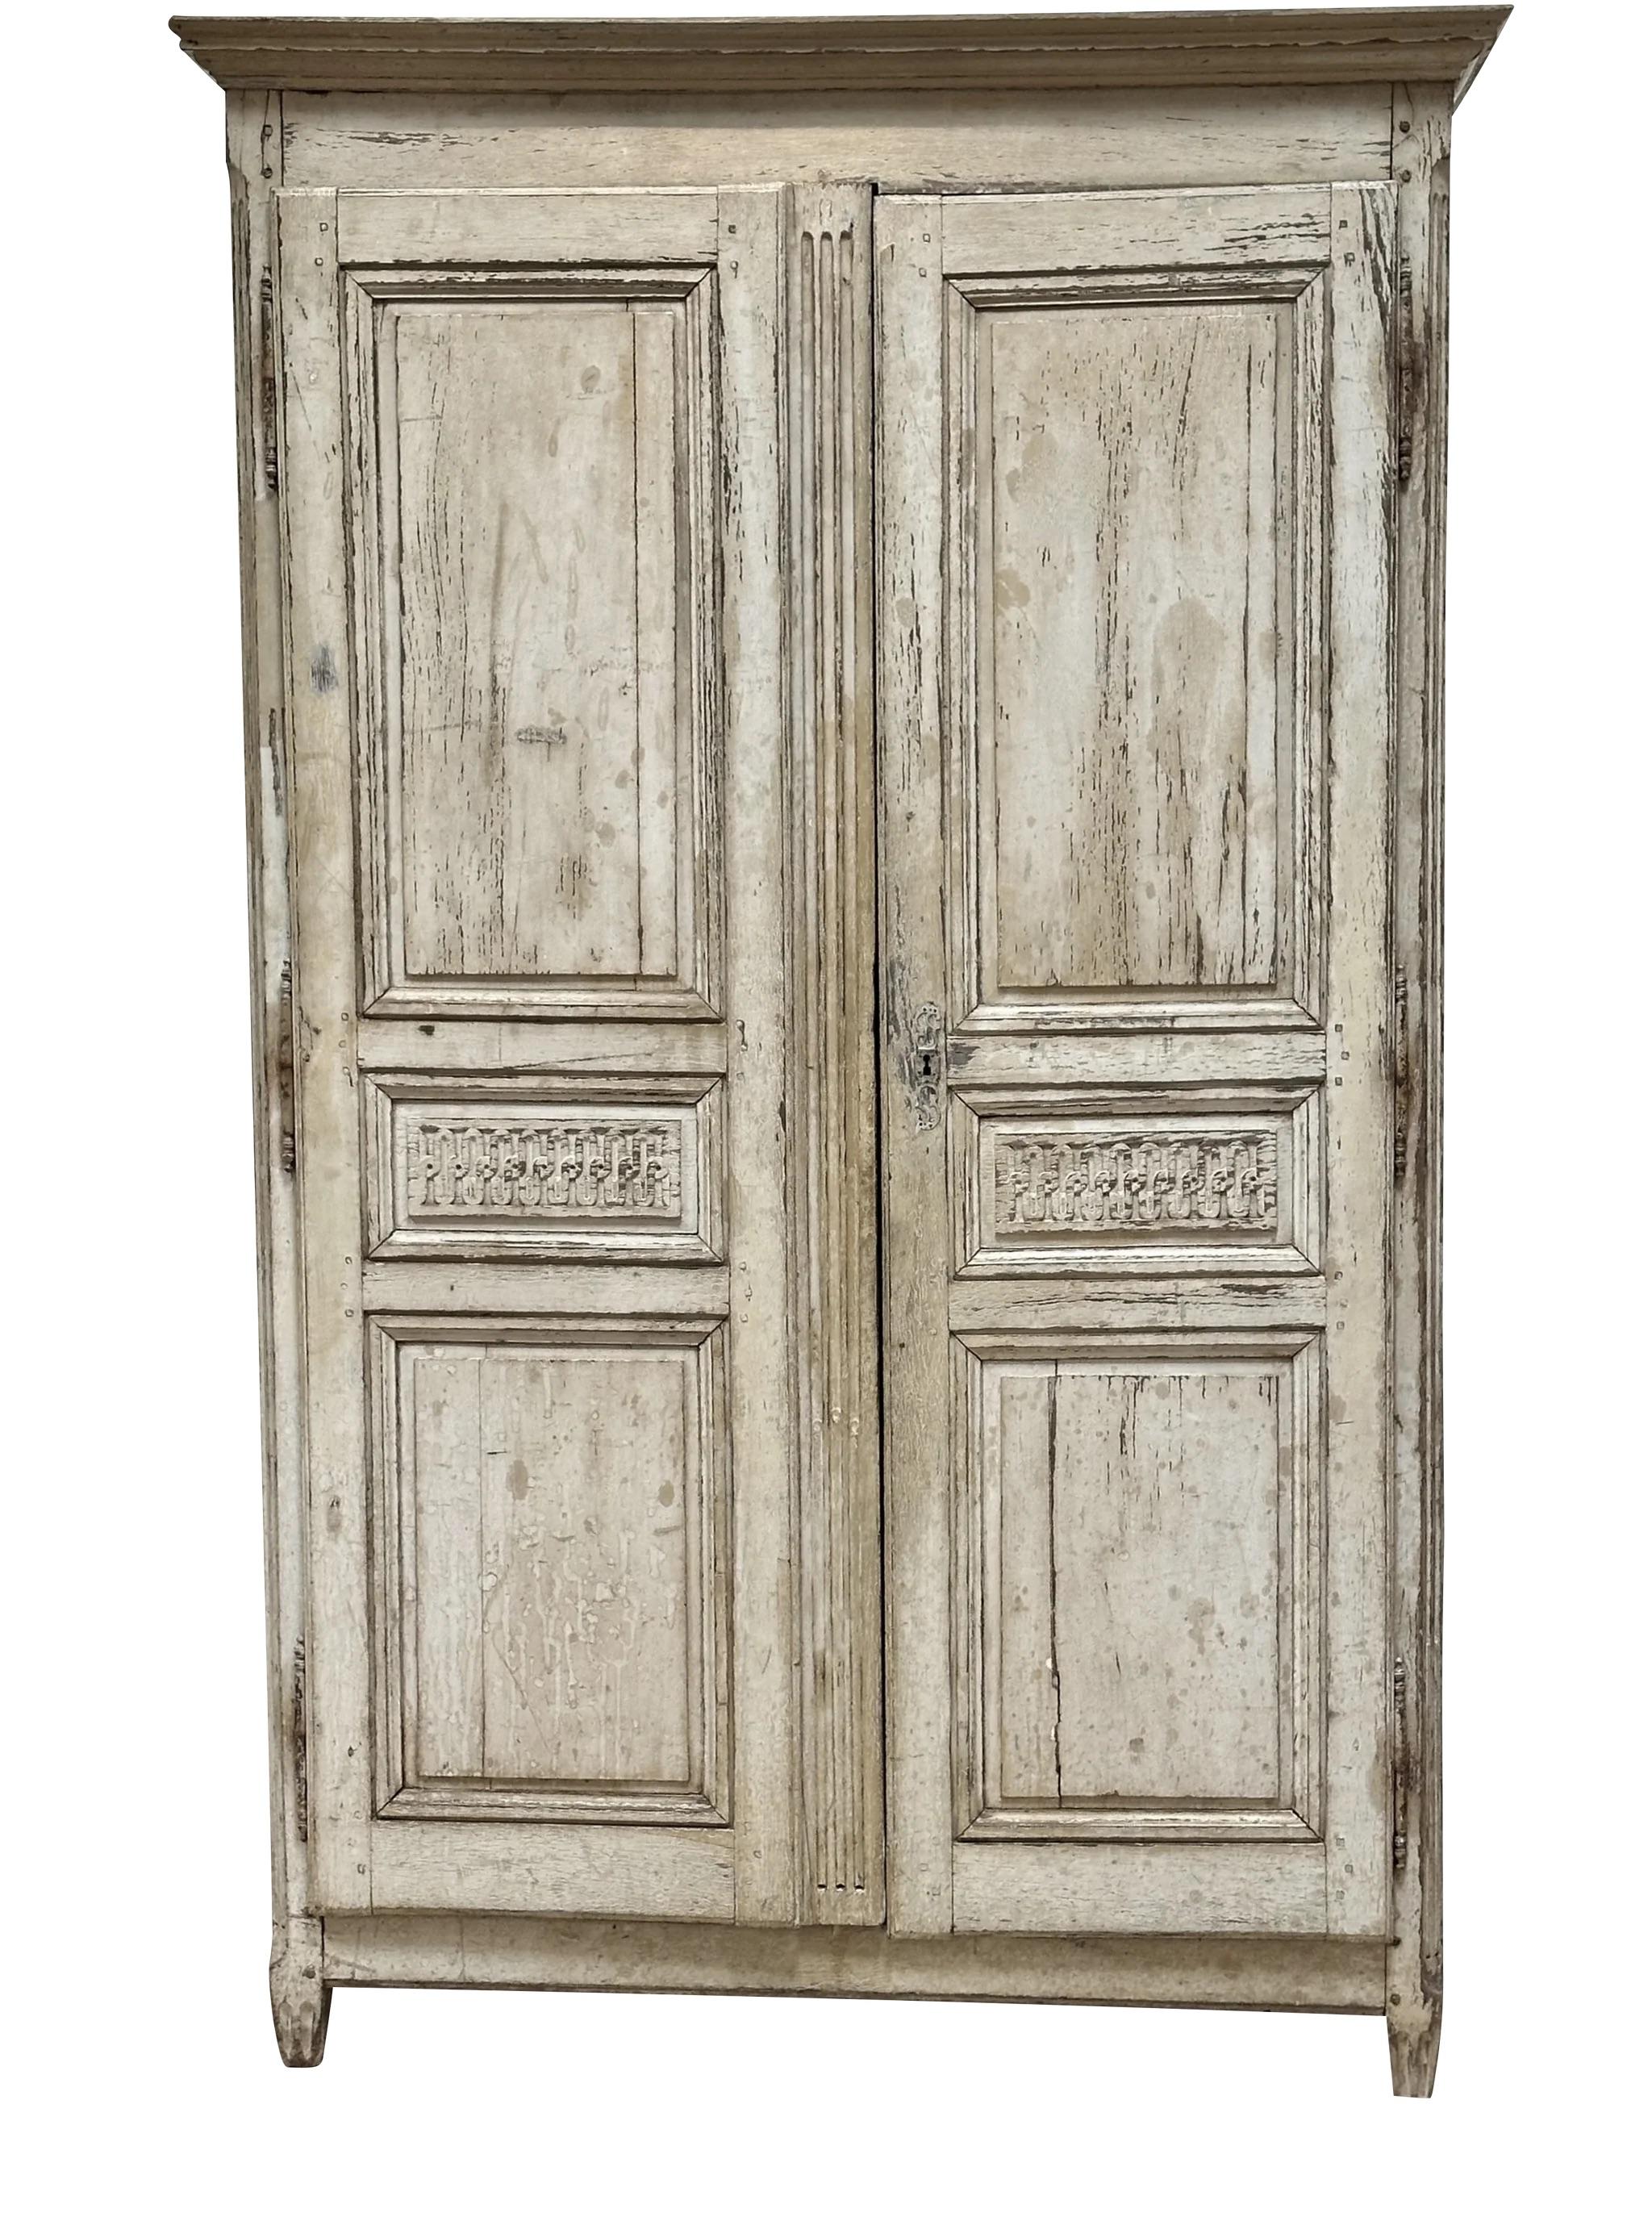 18th Century Swedish armoire, having original pale grey/cream paint, the molded top over two carved doors, having charming guilloche detail to front doors, on slightly bulbous, reeded, tapered feet. Oak.  Currently fitted with 5 removable shelves.